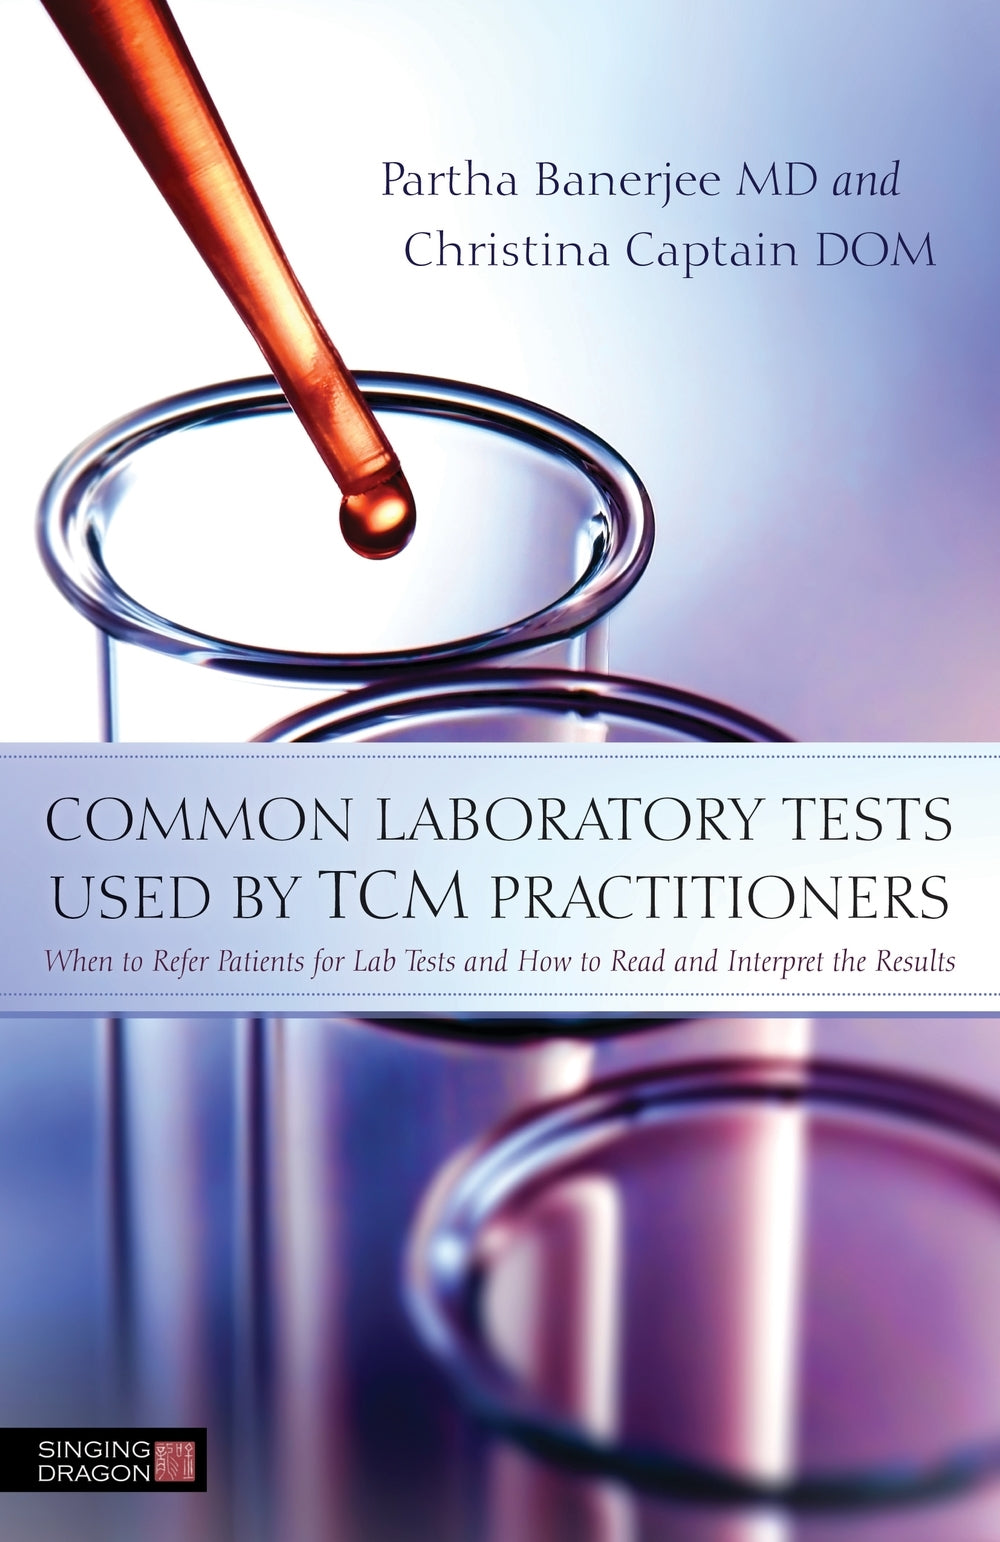 Common Laboratory Tests Used by TCM Practitioners by Partha Banerjee, Christina Captain